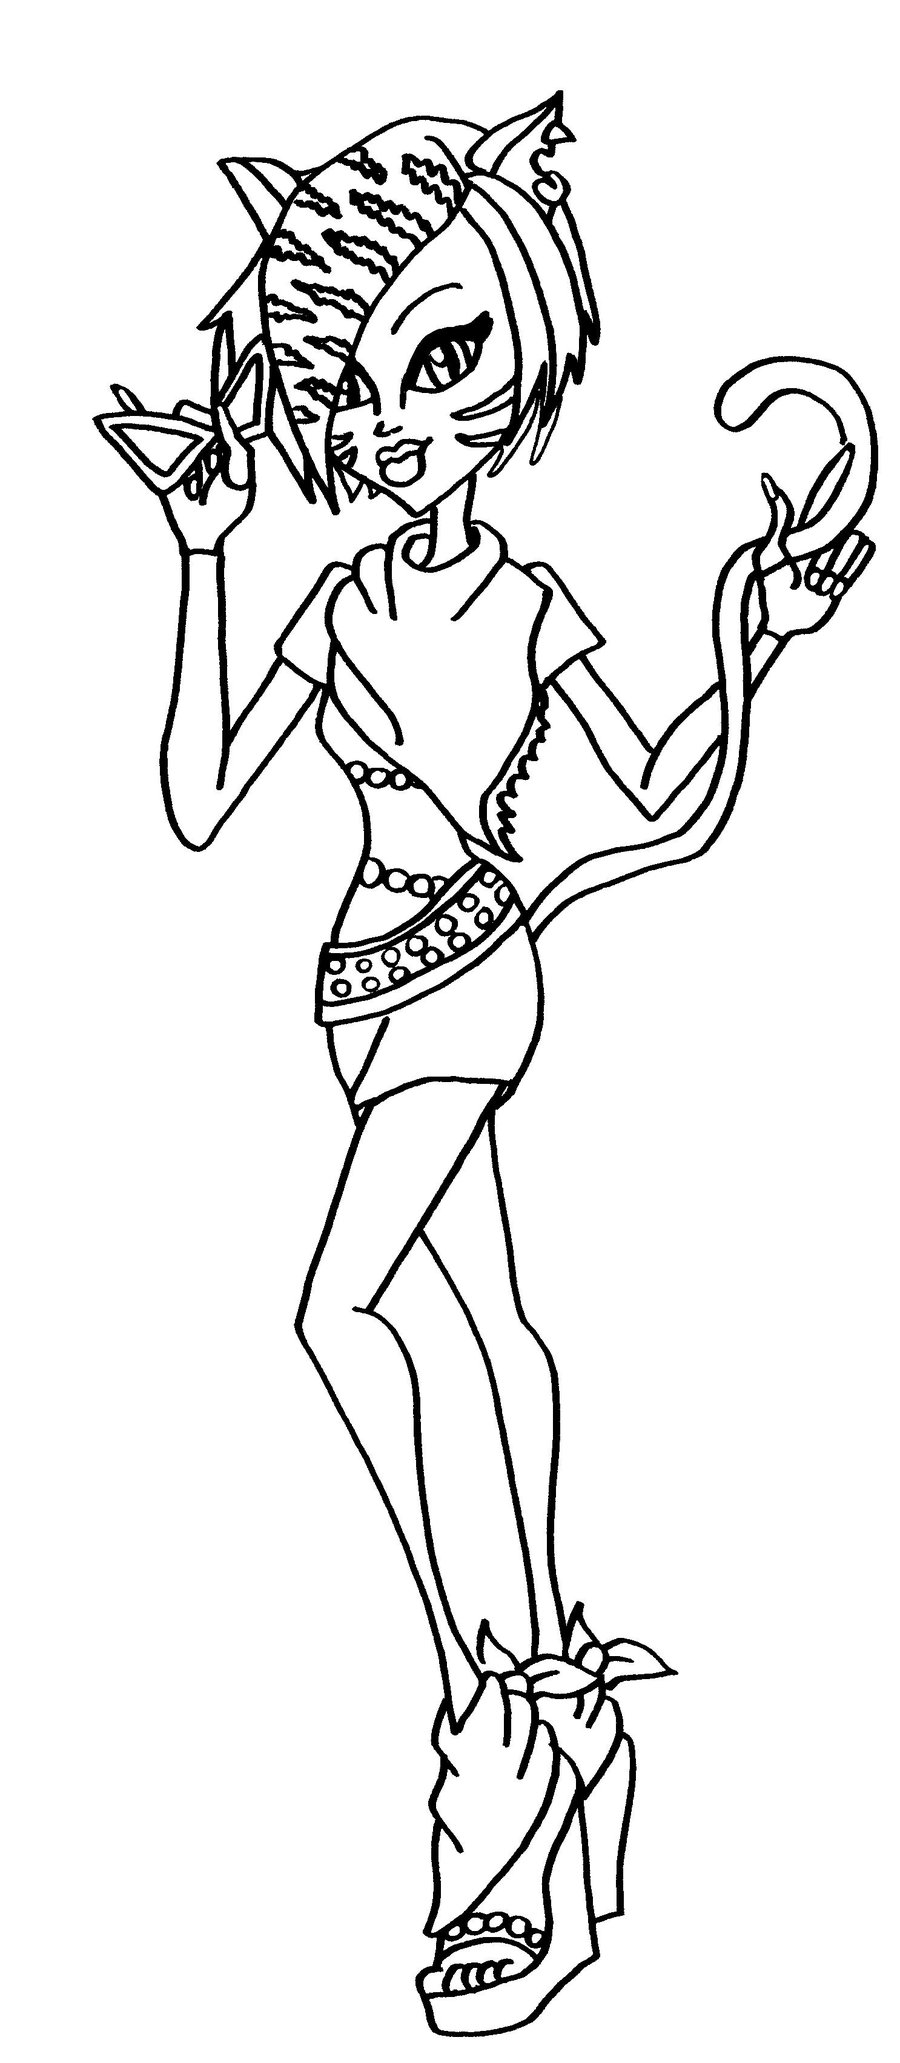 Toralei coloring page